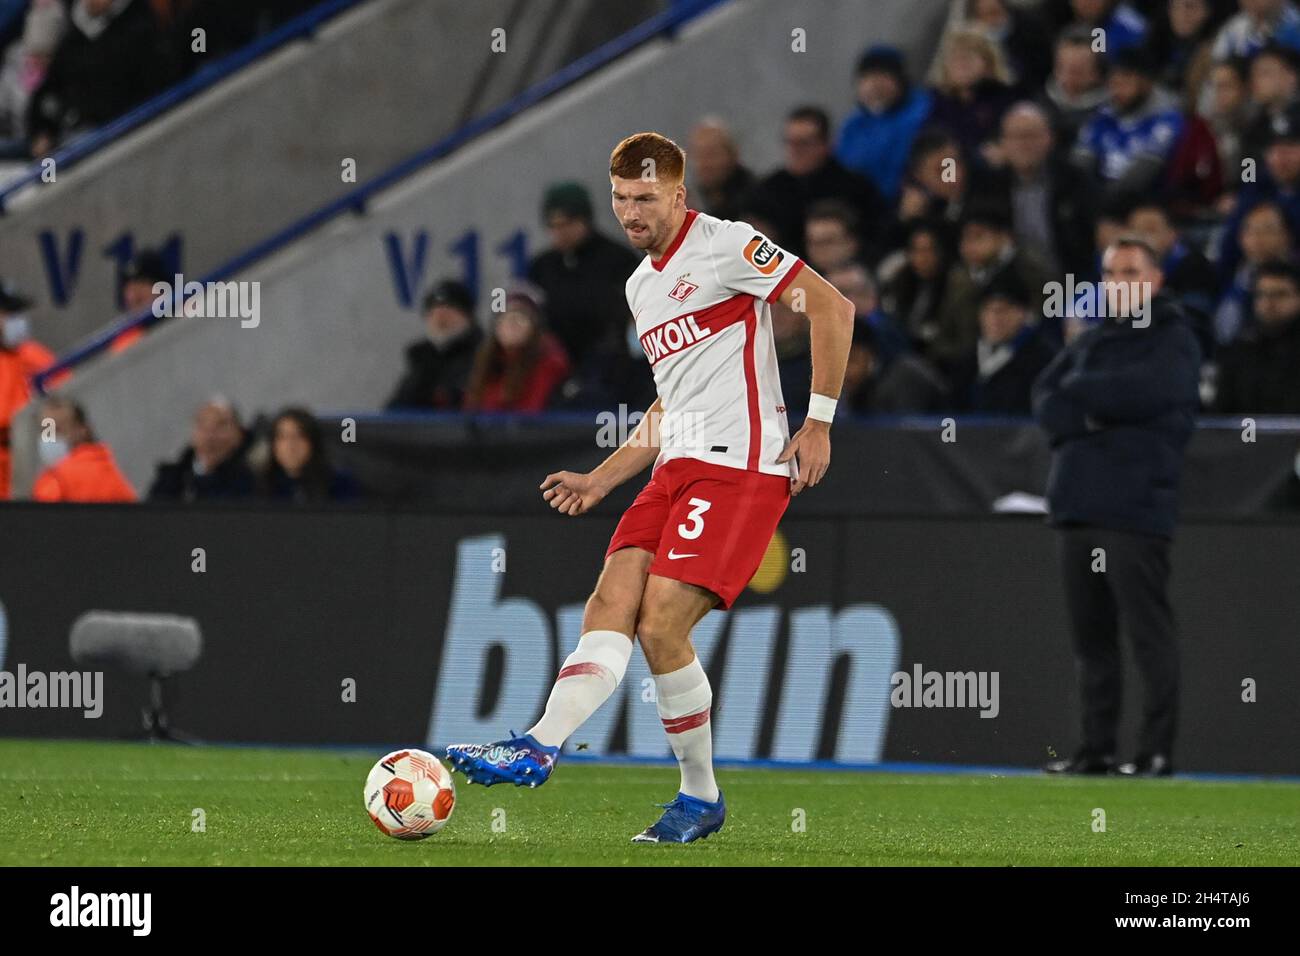 Maximiliano Caufriez (3) of Spartak Moscow passes the ball Stock Photo